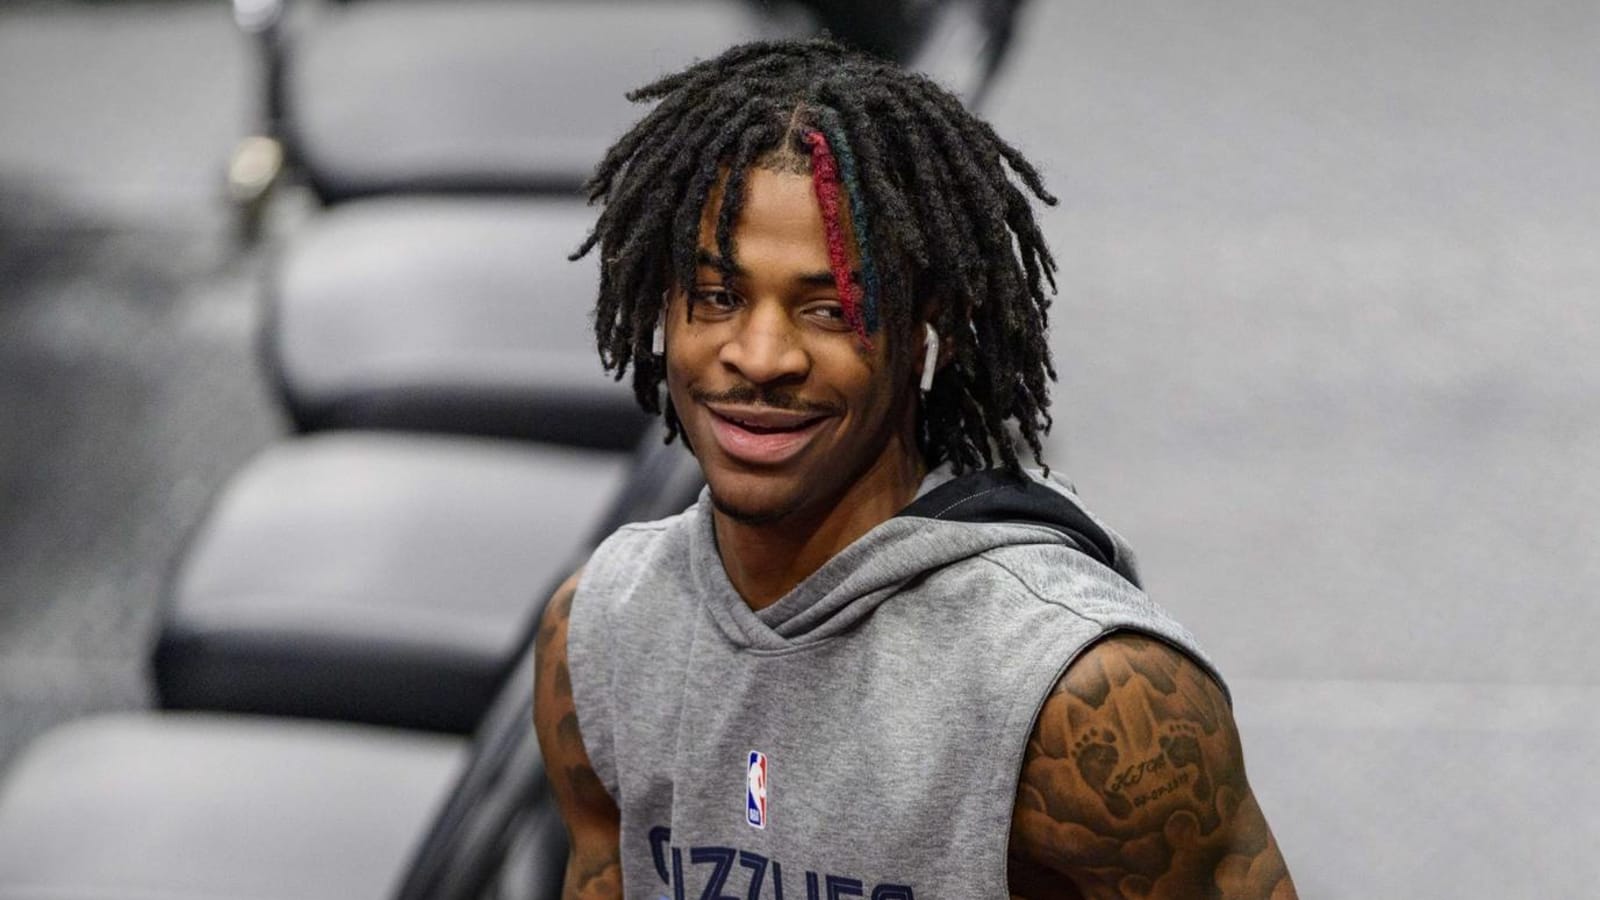 Ja Morant reacts to not making NBA All-Star team